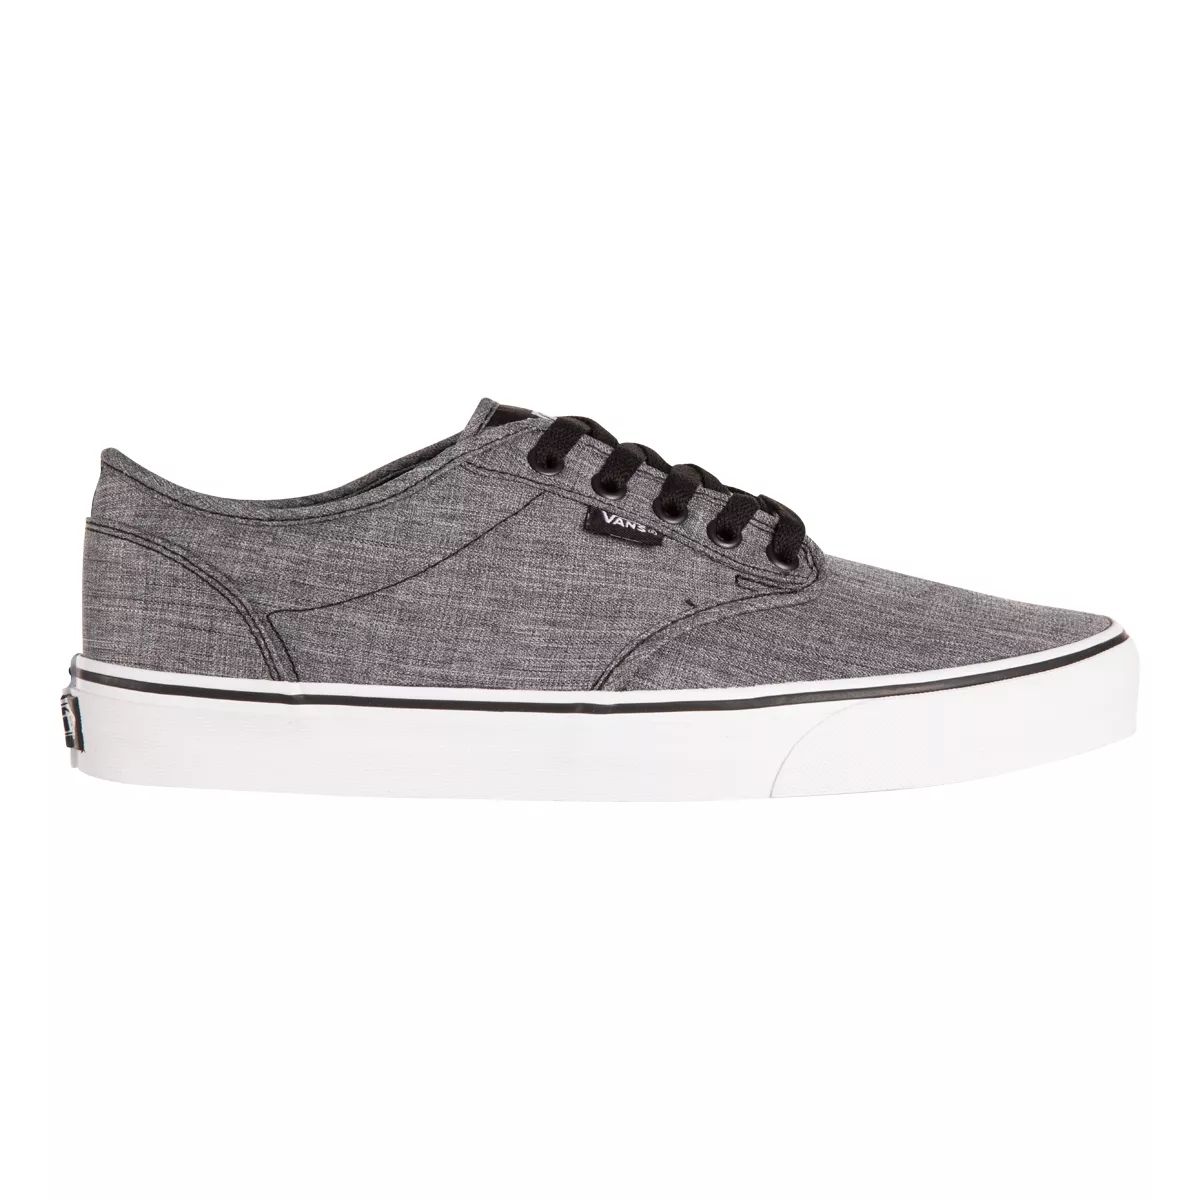 Image of Vans Men's Atwood Skate Shoes Sneakers